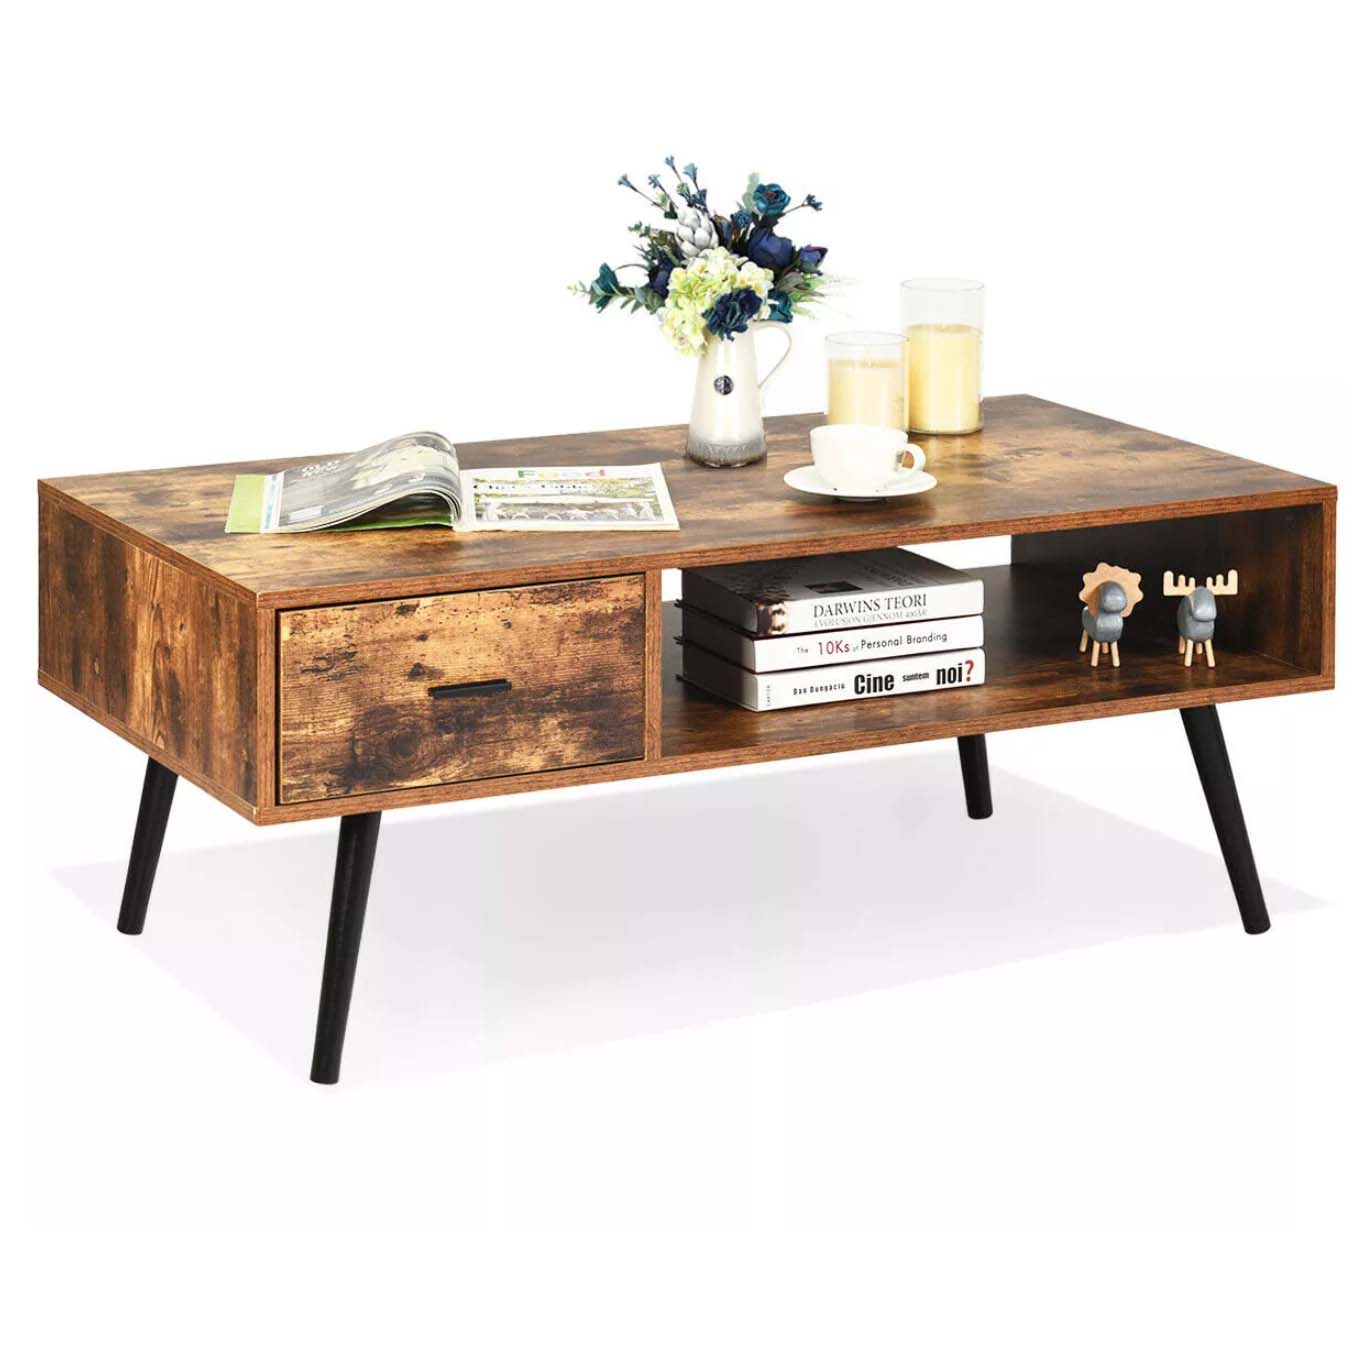 Coffee table in dark wood with home decor on display